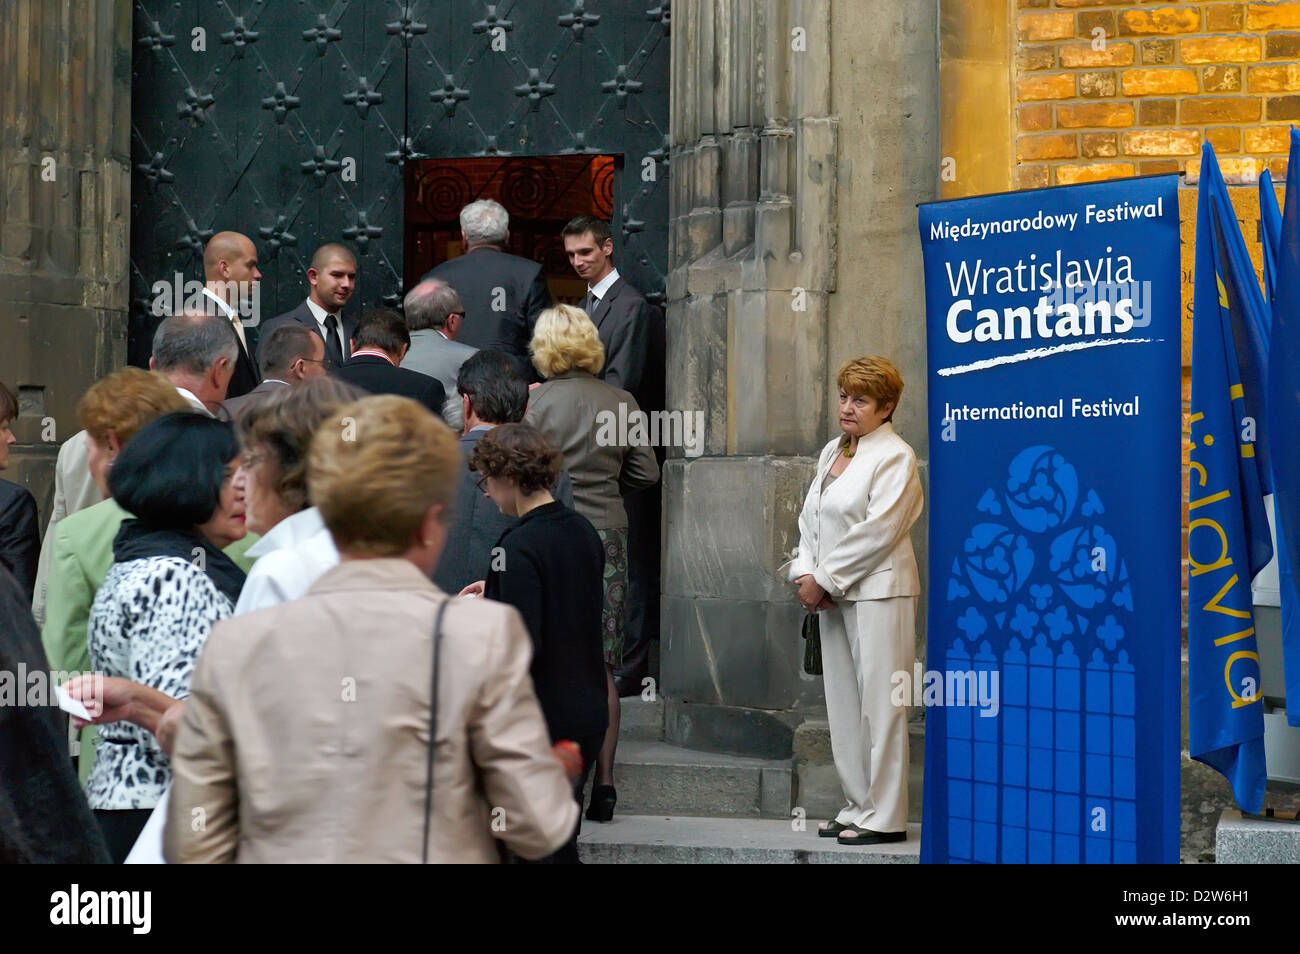 Wroclaw, Poland, concertgoers of classical music festivals Wratislavia Cantans awaiting admission Stock Photo